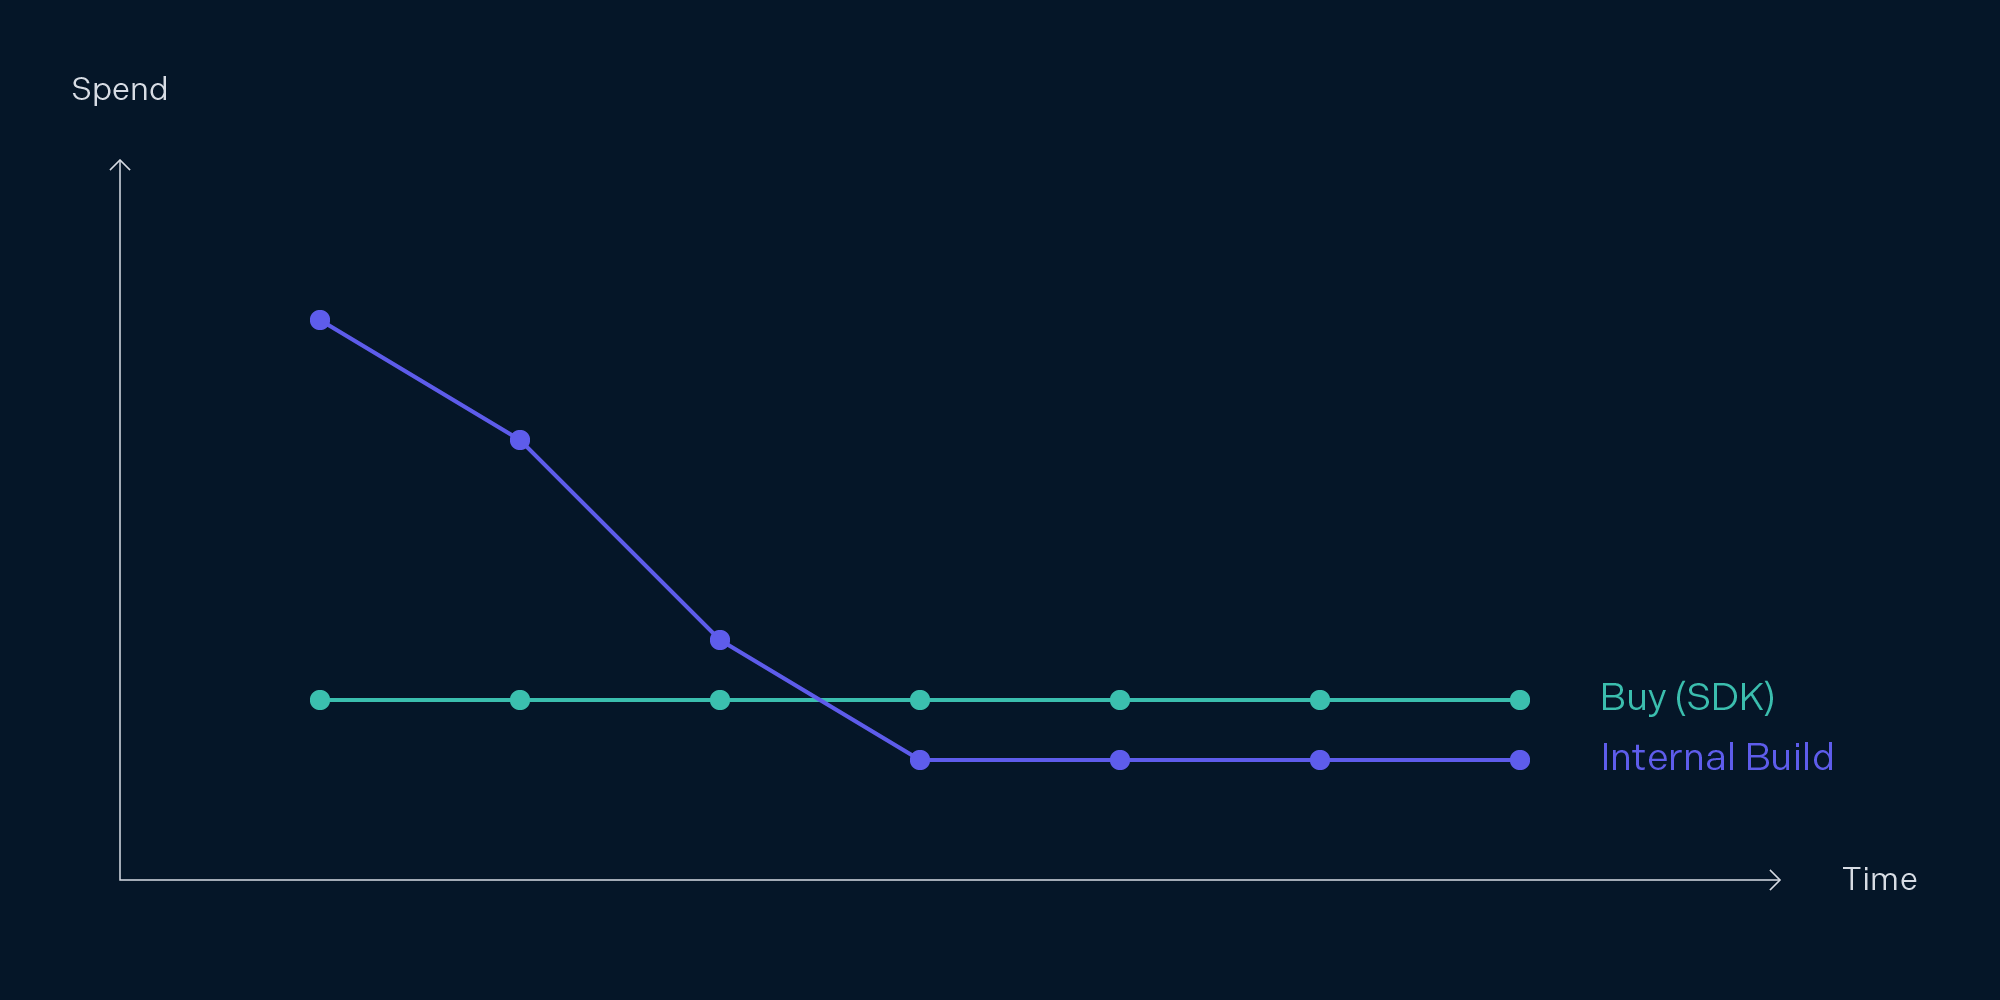 Line graph showing build cost vs. buy cost over time, with build starting expensive then tapering and buy displaying a consistent low spend